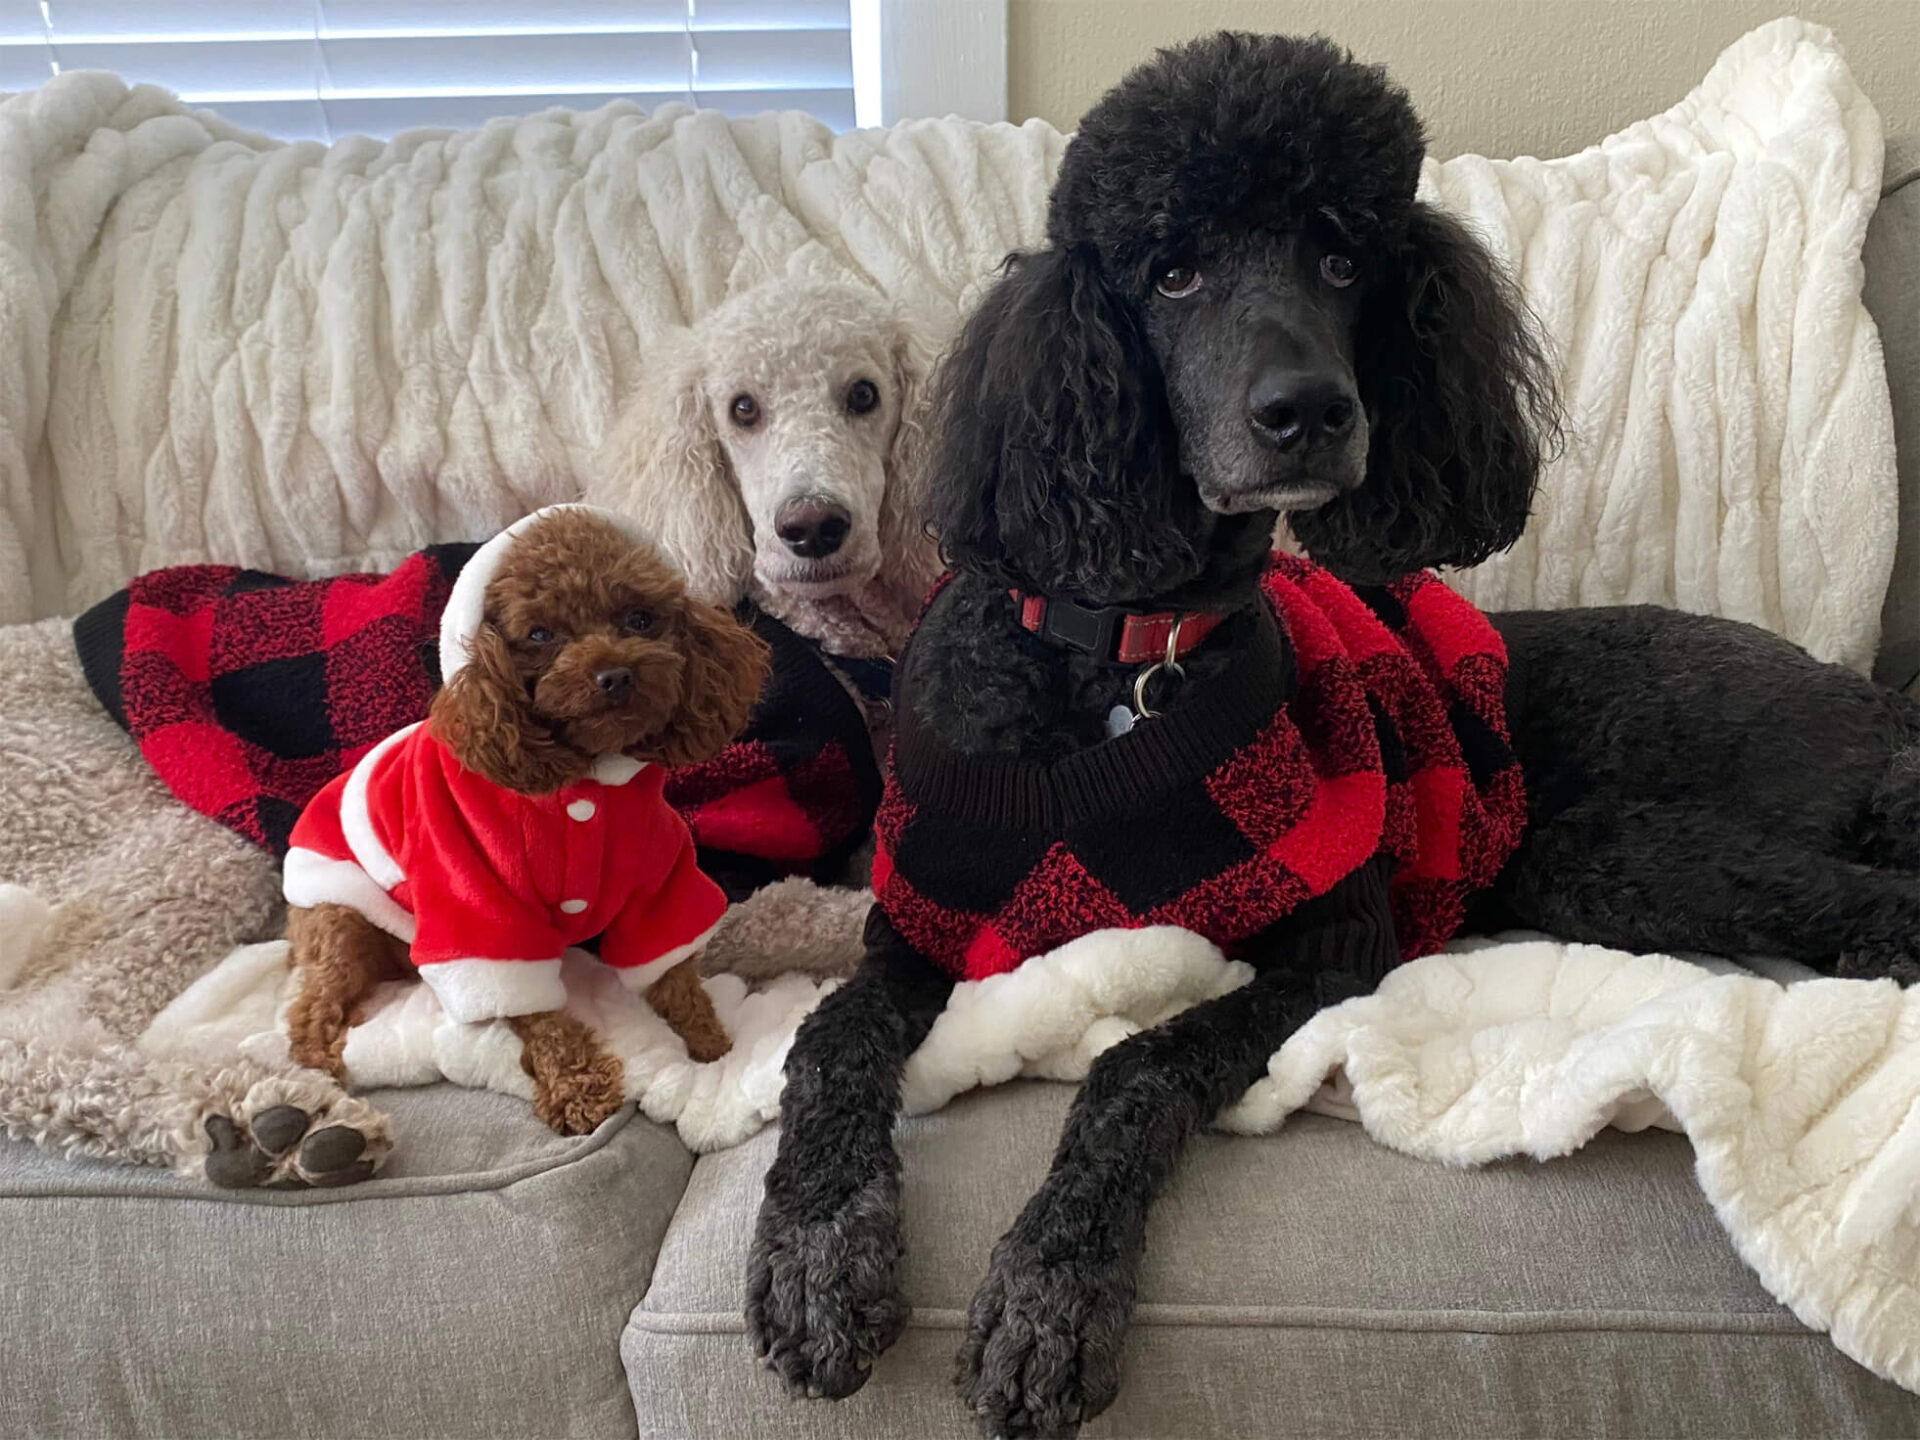 Three dogs in red color dress sitting on the couch